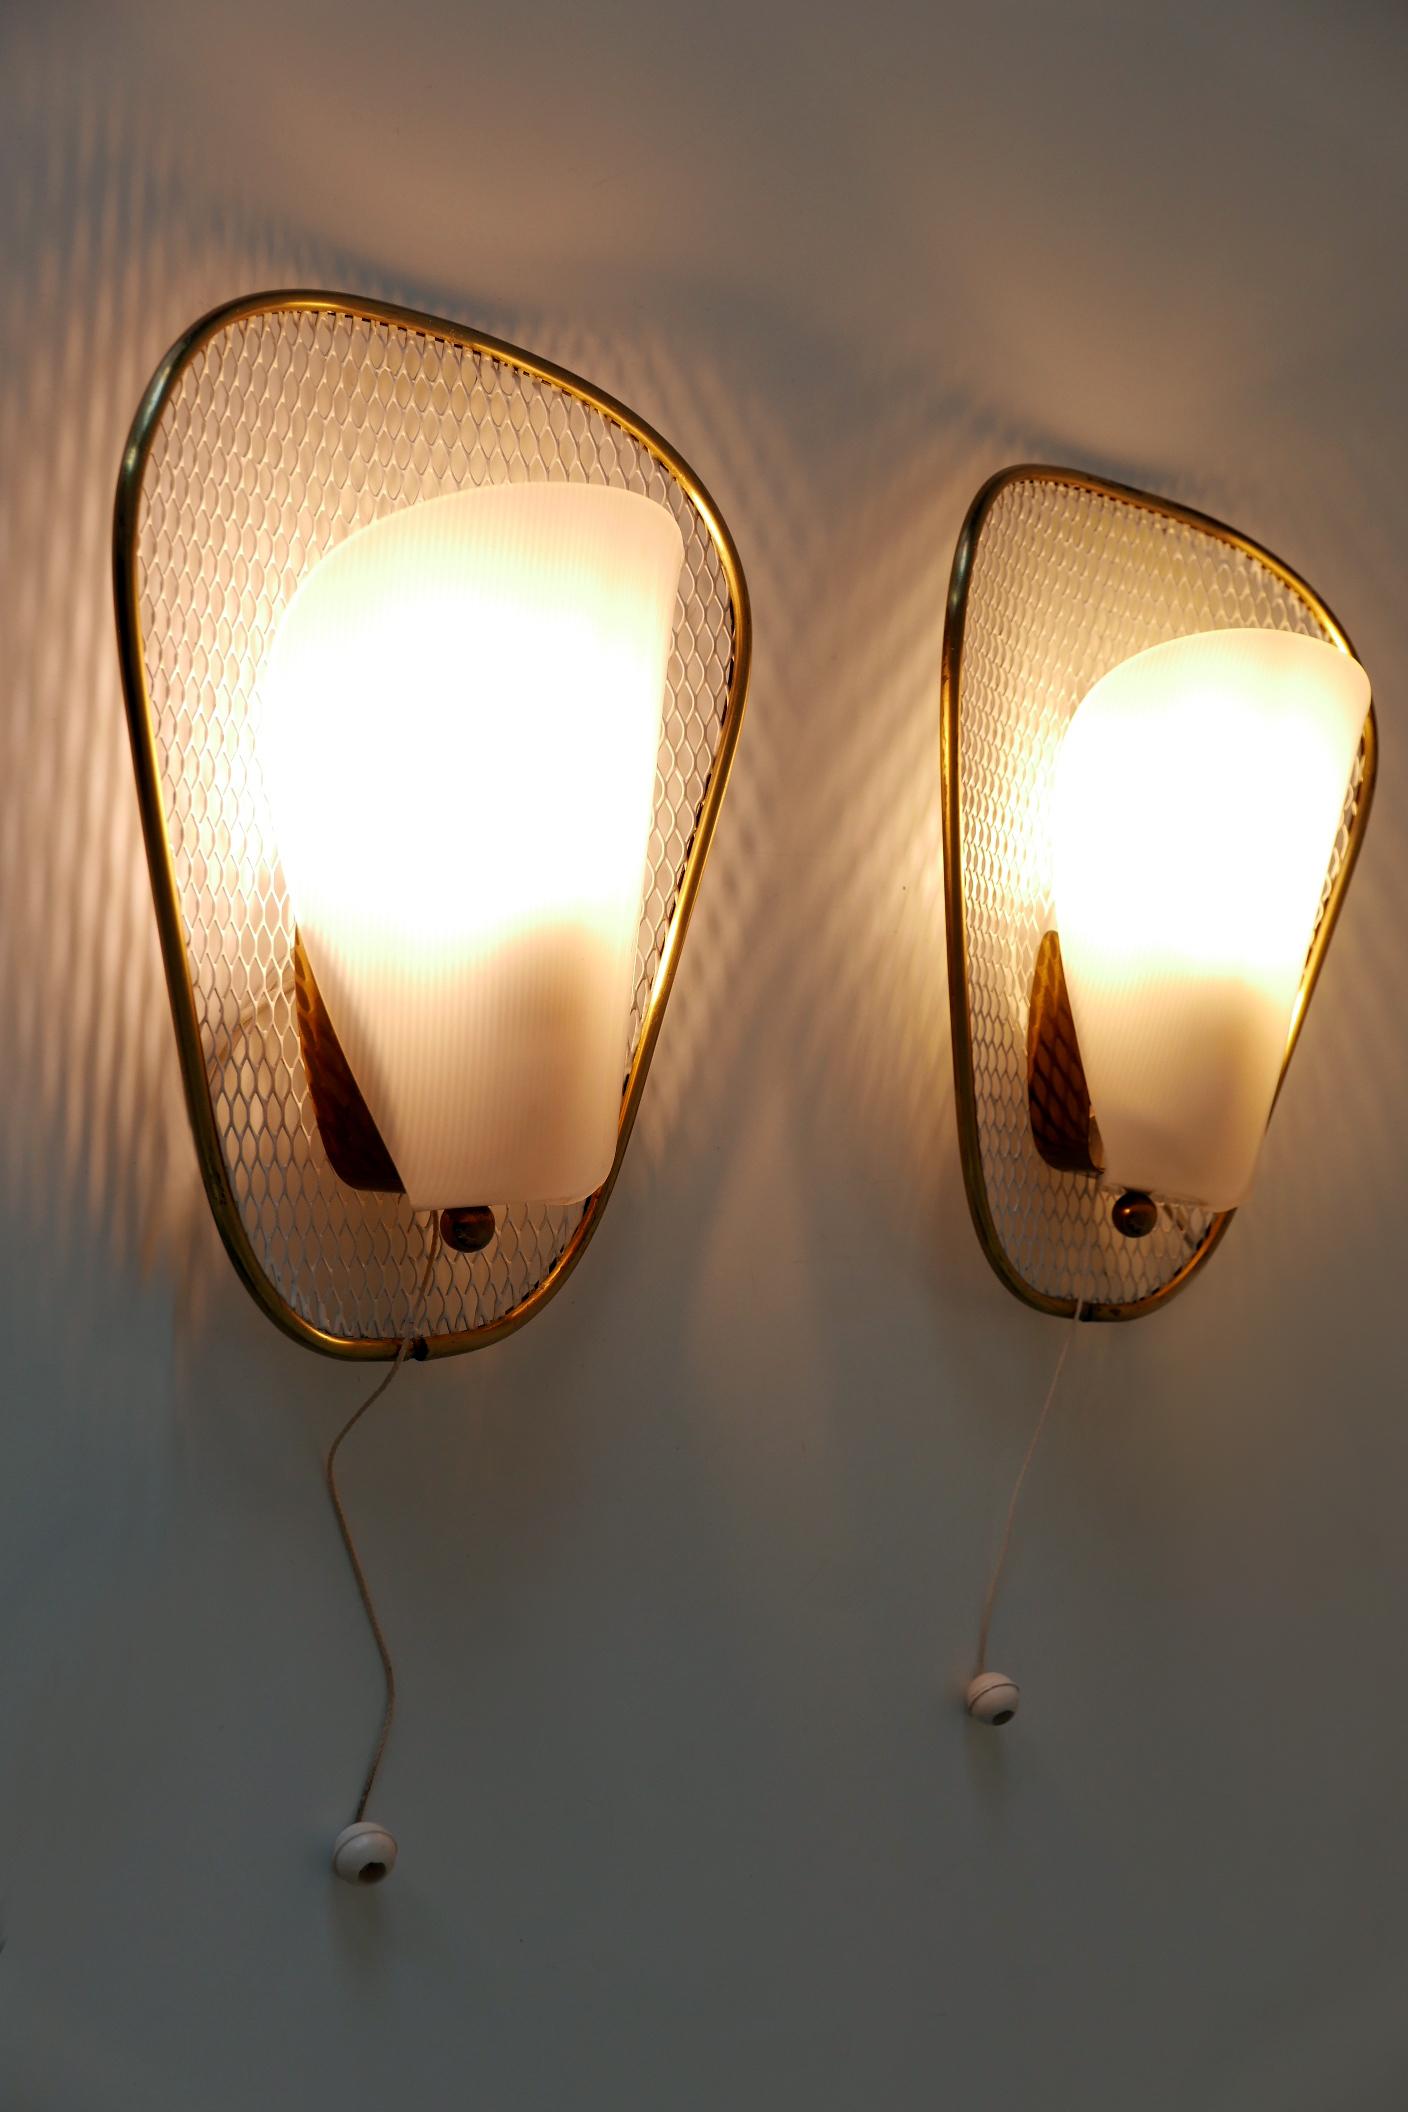 Set of Two Rare & Elegant Mid-Century Modern Sconces or Wall Lamps Germany 1950s For Sale 11